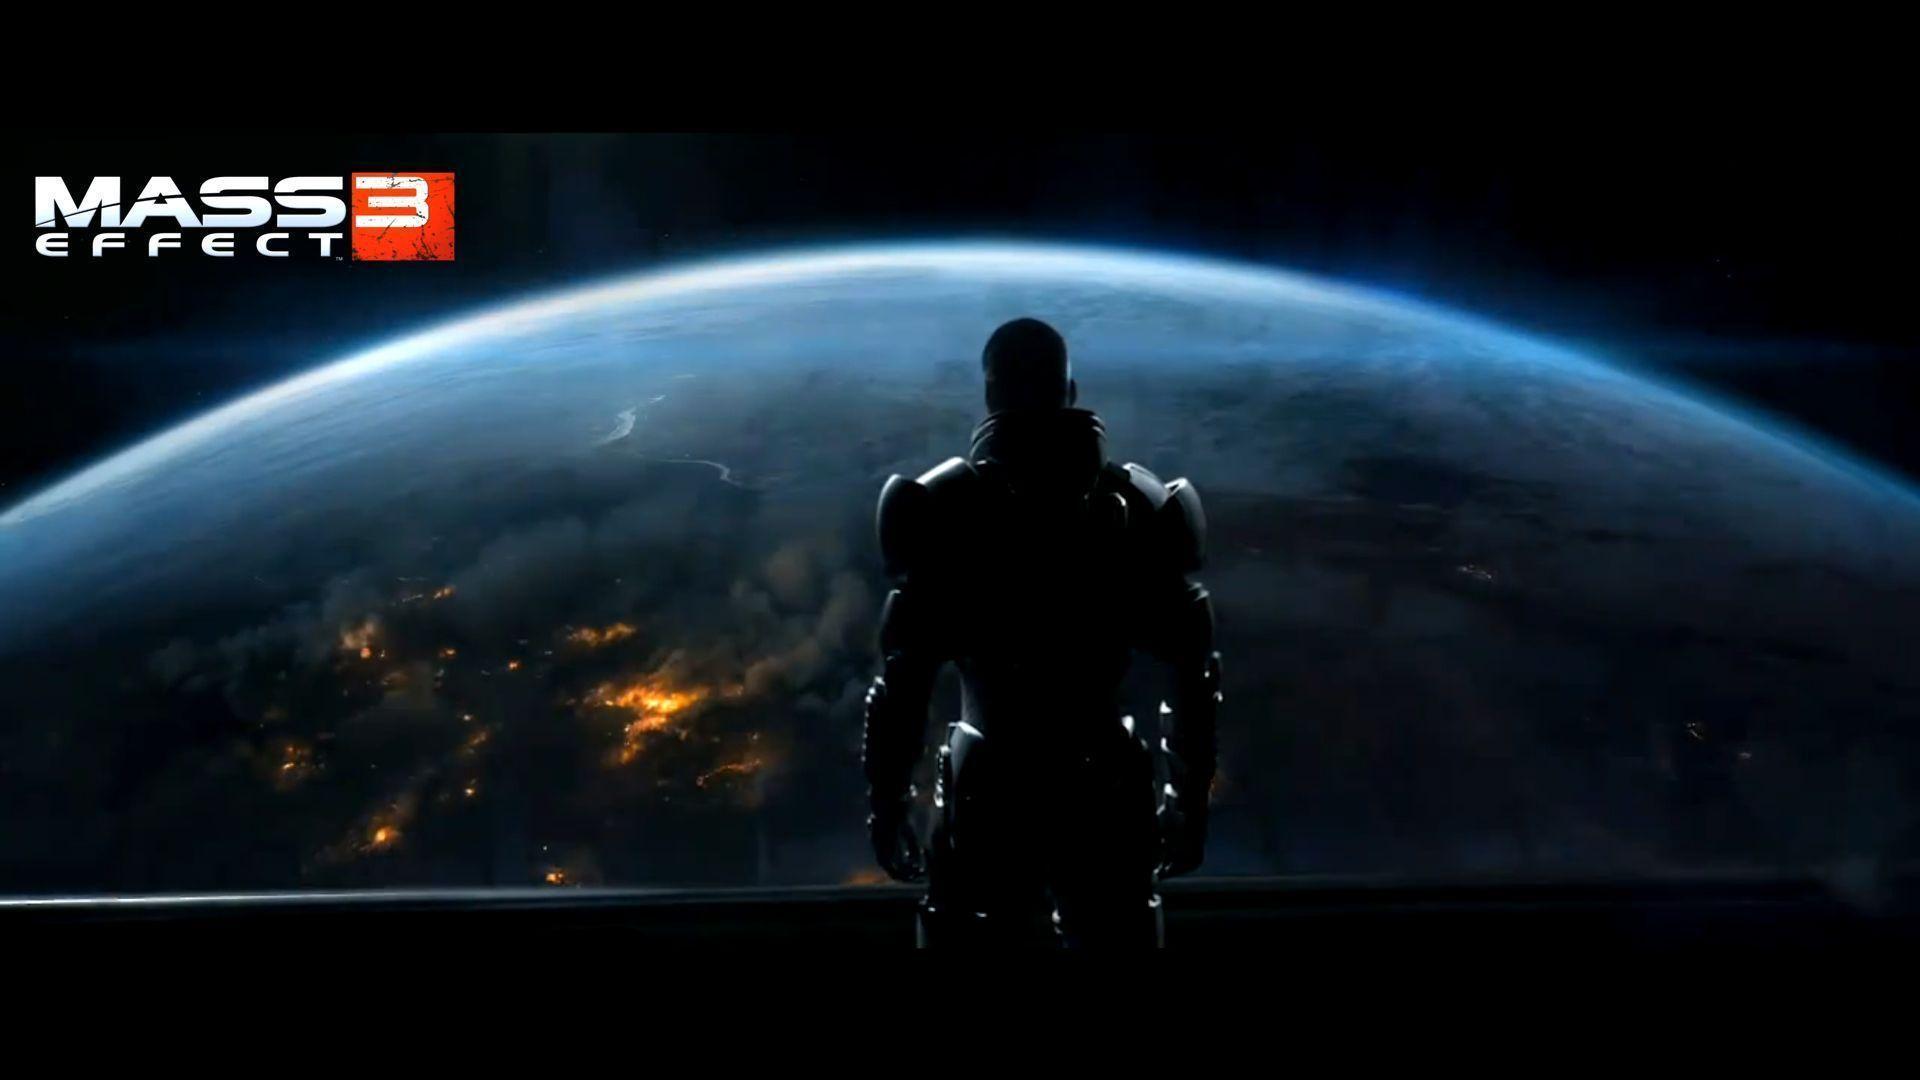 image For > Mass Effect 3 Earth Wallpaper HD